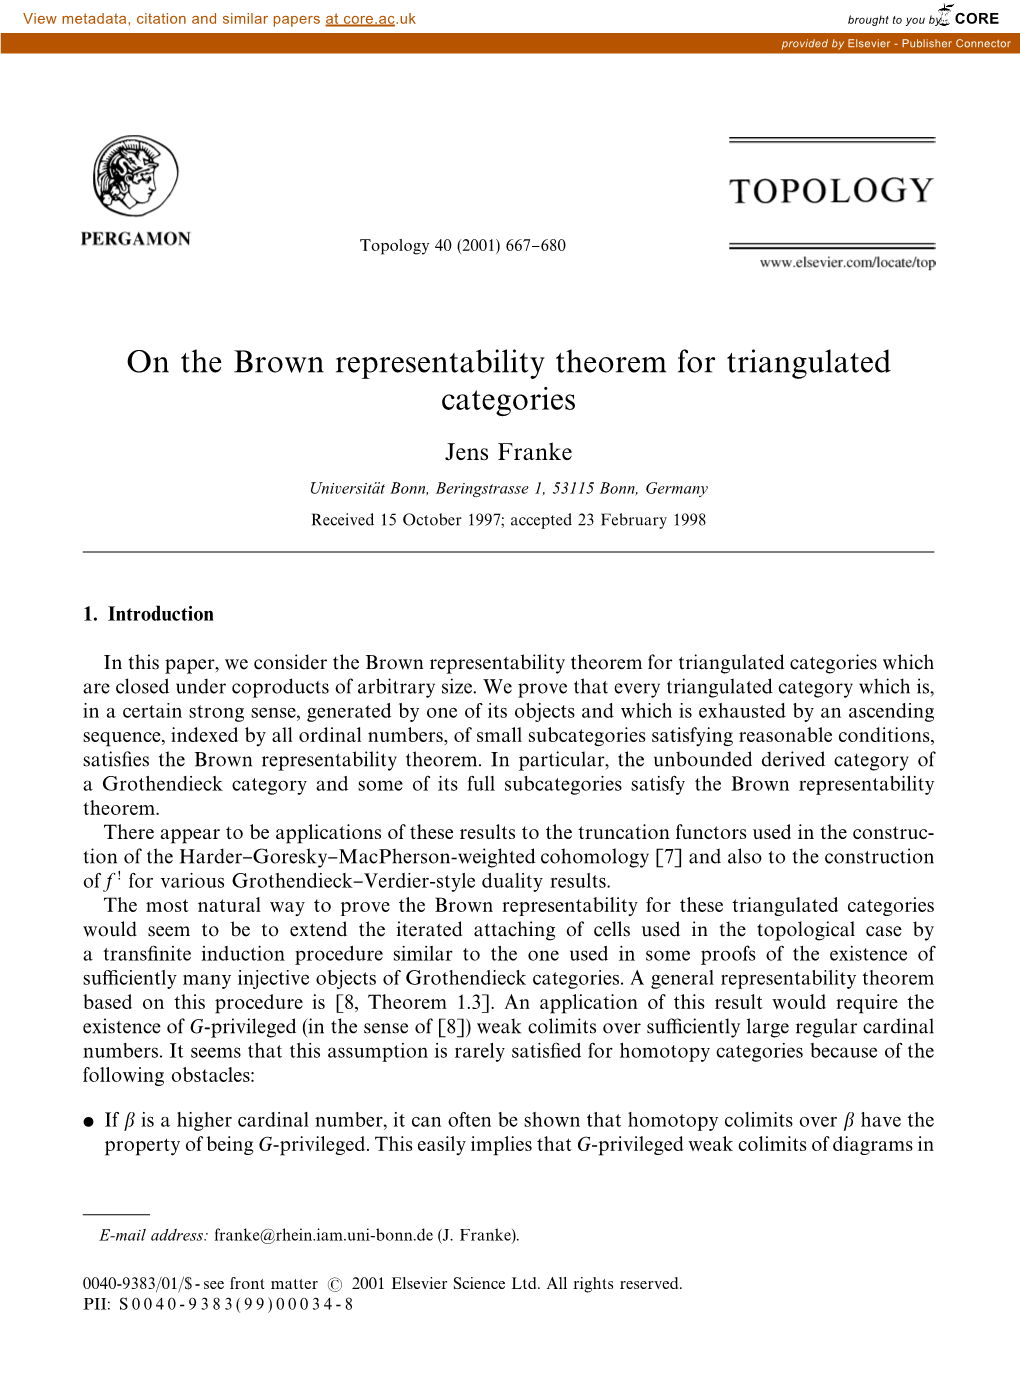 On the Brown Representability Theorem for Triangulated Categories